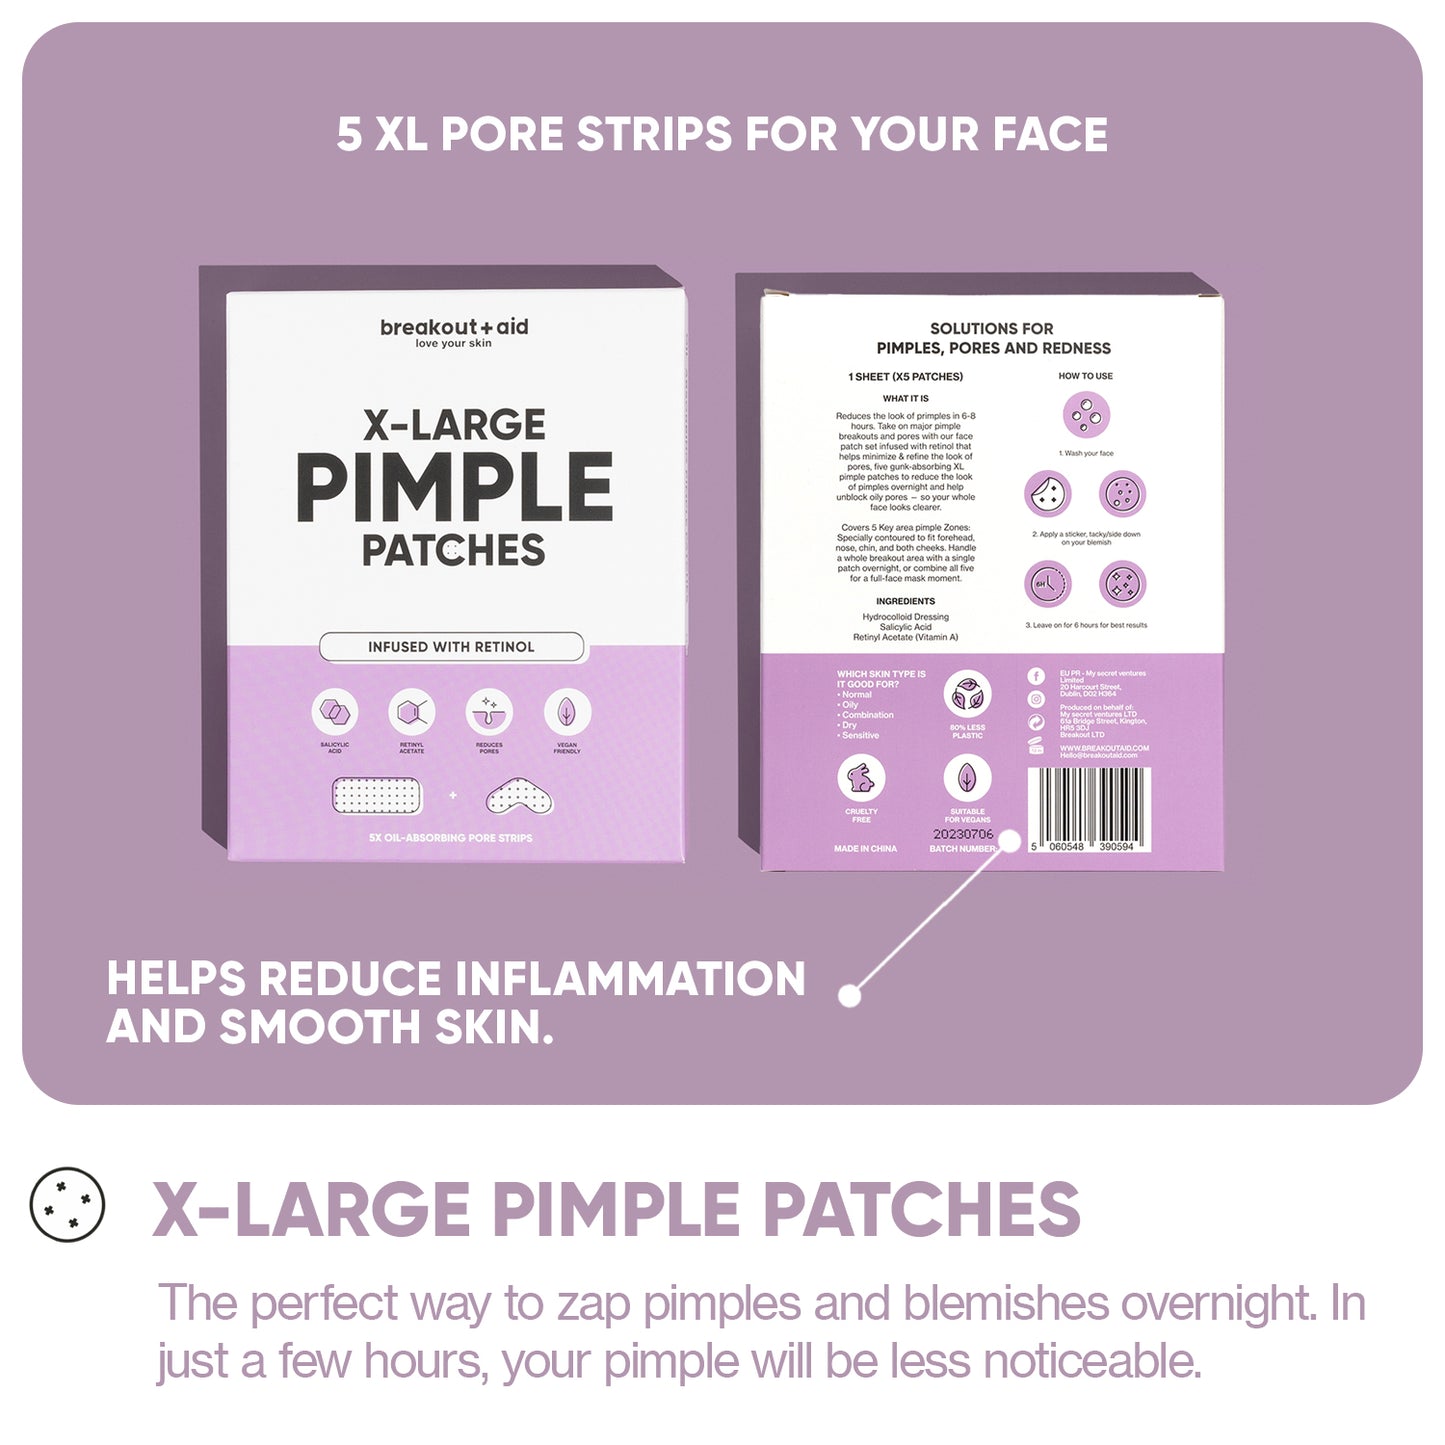 X-Large Pimple Patches Infused with Retinol & Salicylic acid.